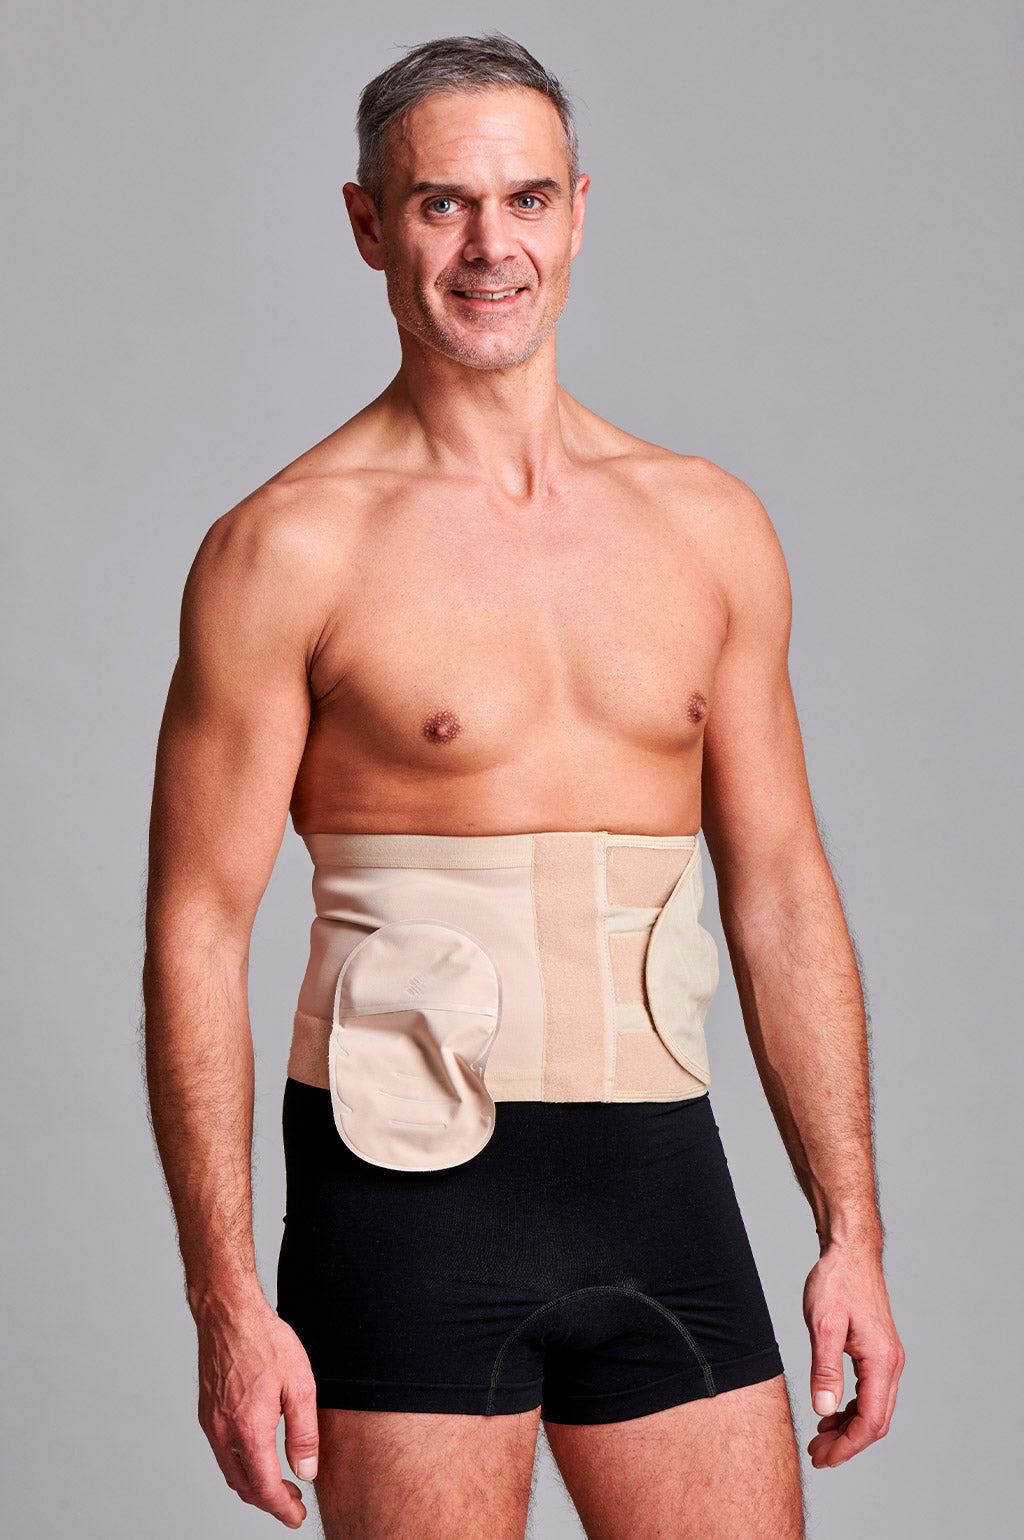 Mens Briefs with Pocket for Stoma / Ostomy Bag – Available in 4 sizes